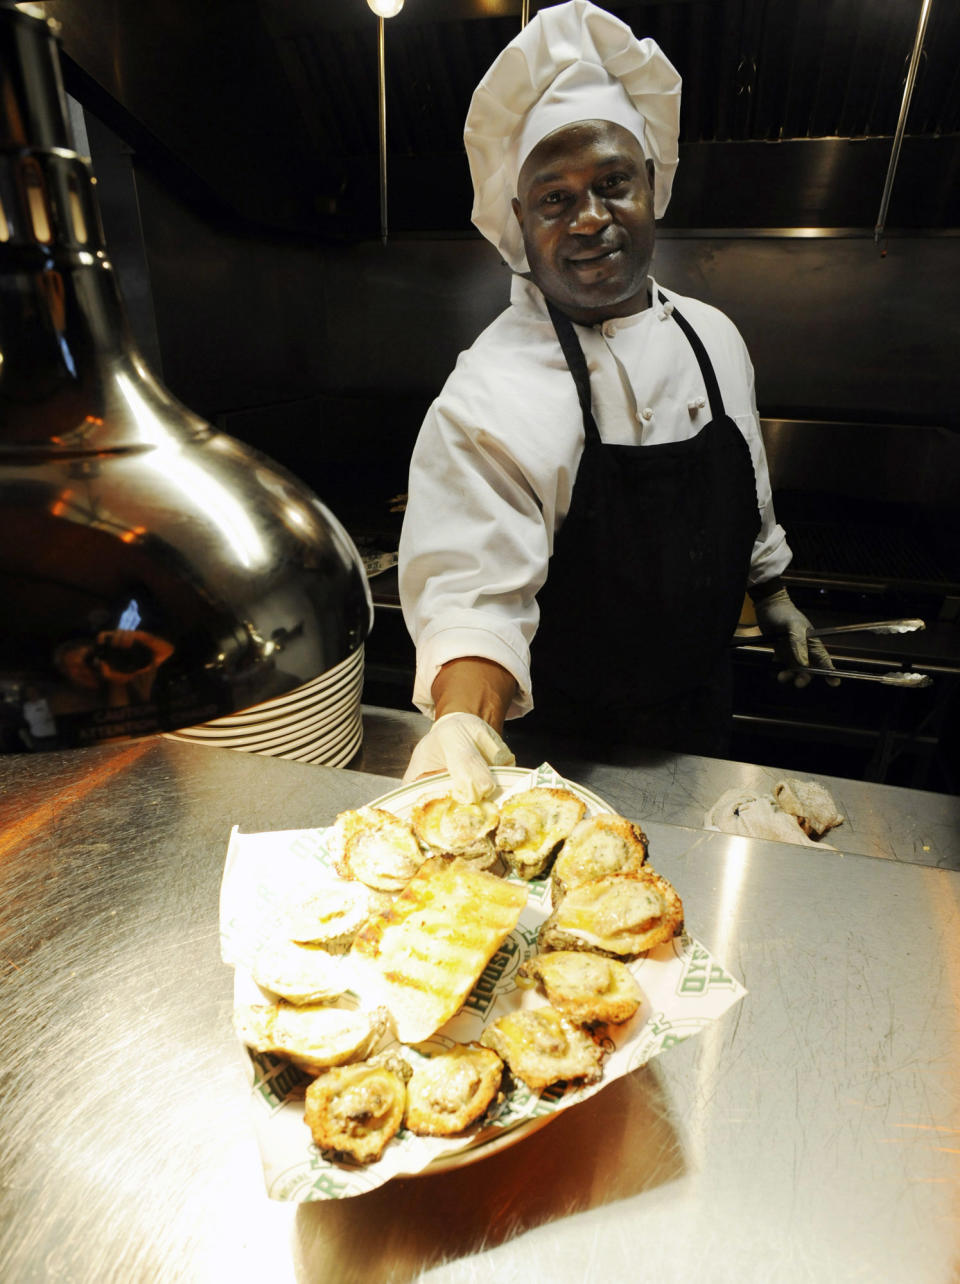 This March 1, 2014 photo shows Albert King serving a plate of grilled oysters at the Original Oyster House in Spanish Fort, Ala. The business is one of more than a half-dozen restaurants on "Seafood Row," located on a parkway across the Mobile Delta at Mobile, Ala. Many locals know the area for family-style seafood, but visitors sometimes have a difficult time finding it. (AP Photo/Jay Reeves)